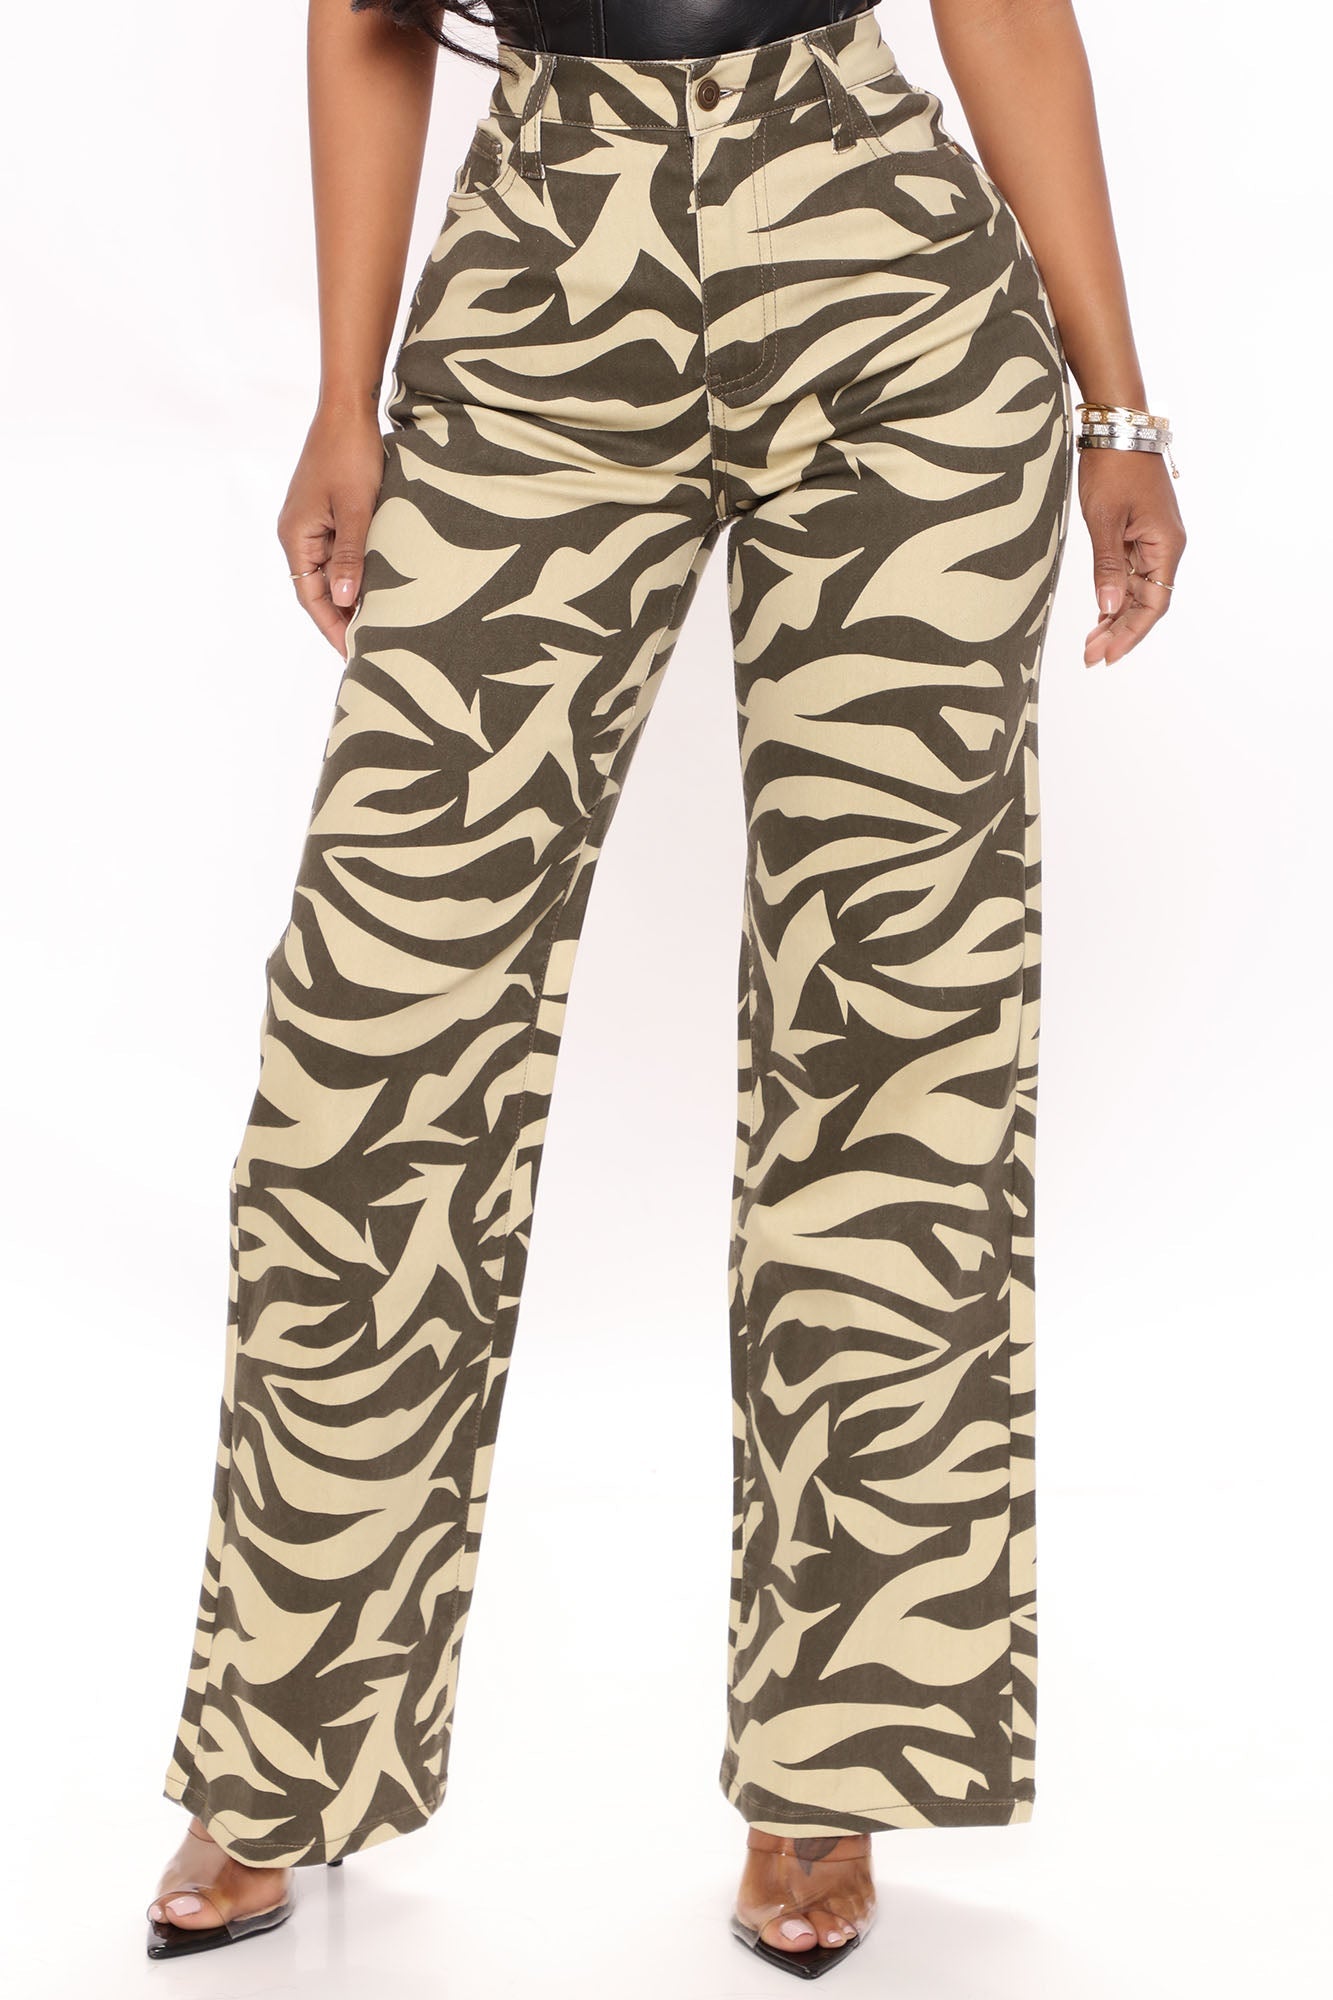 Wild Child Printed Straight Leg Jeans - Olive/combo